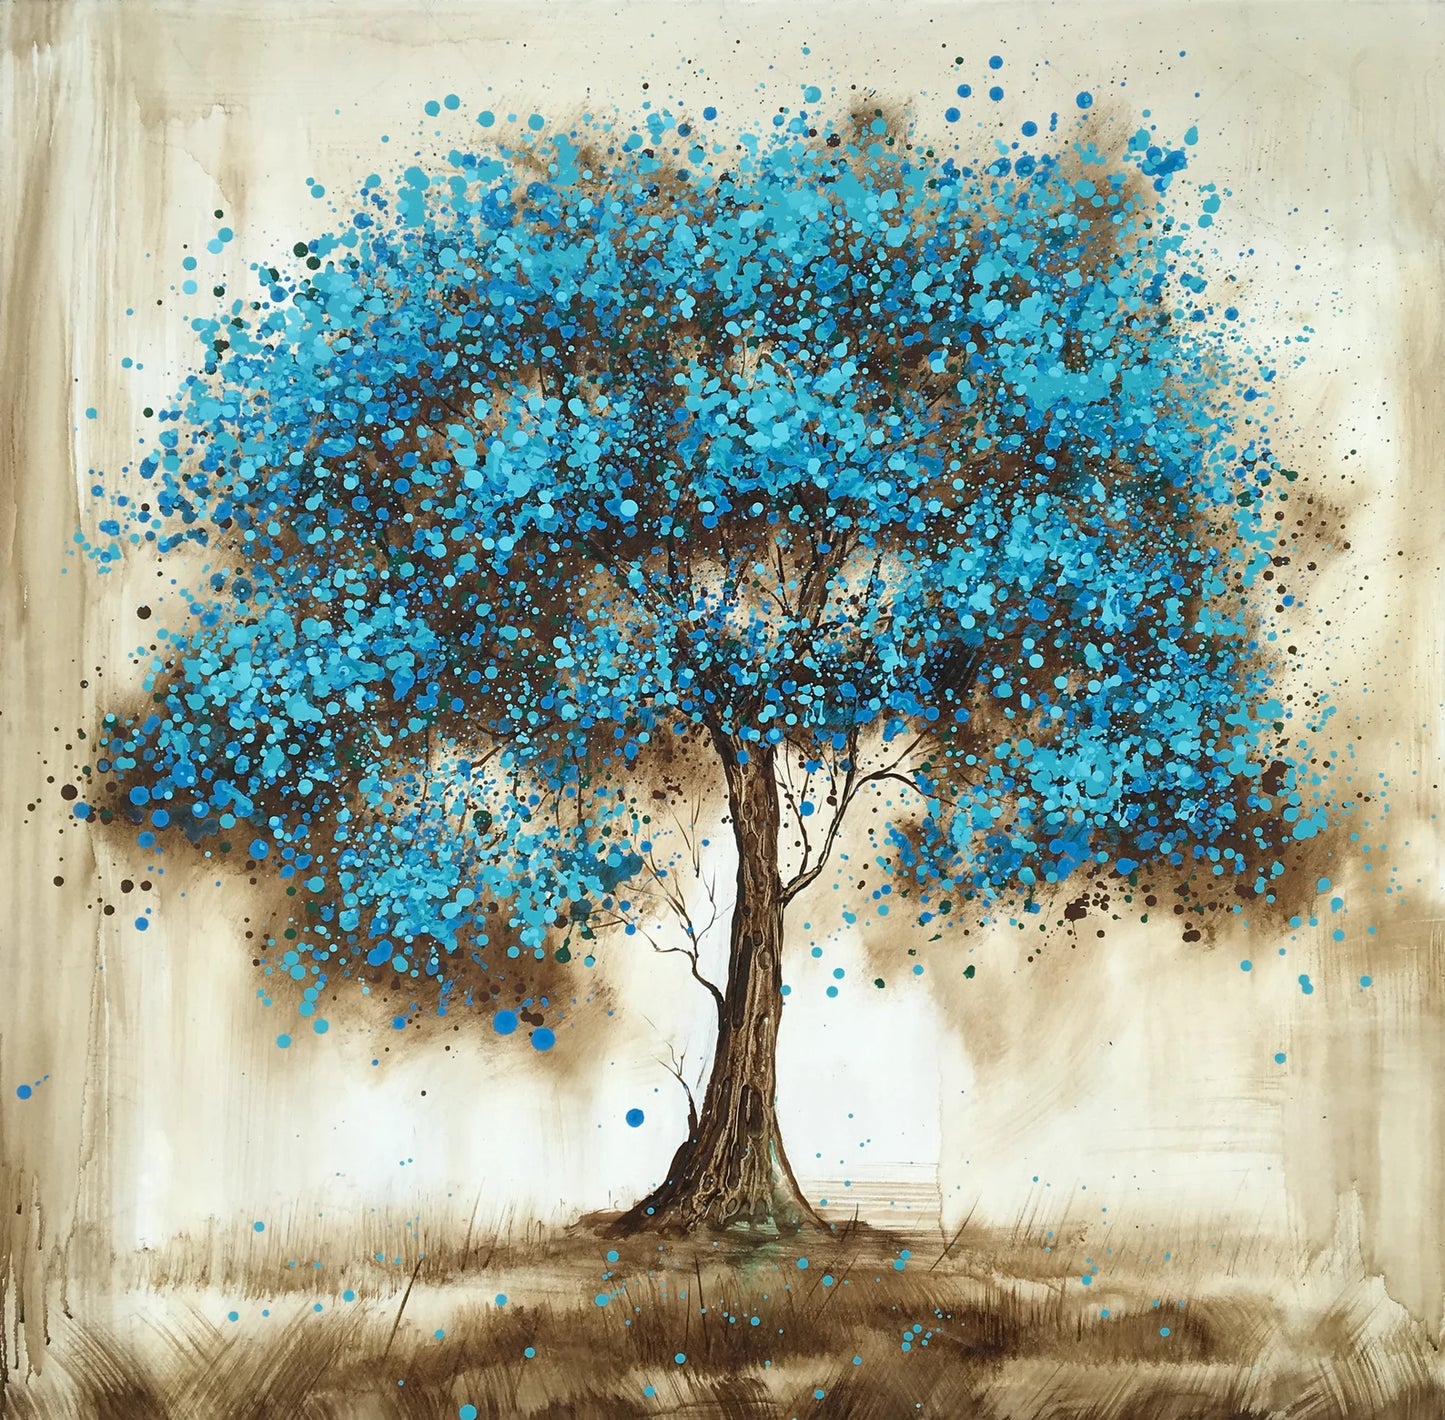 Hand-painted Art "Blue tree in Memory" Oil painting original, Wall art for living room, bedroom, Office, Bar - Wrapped Canvas Painting